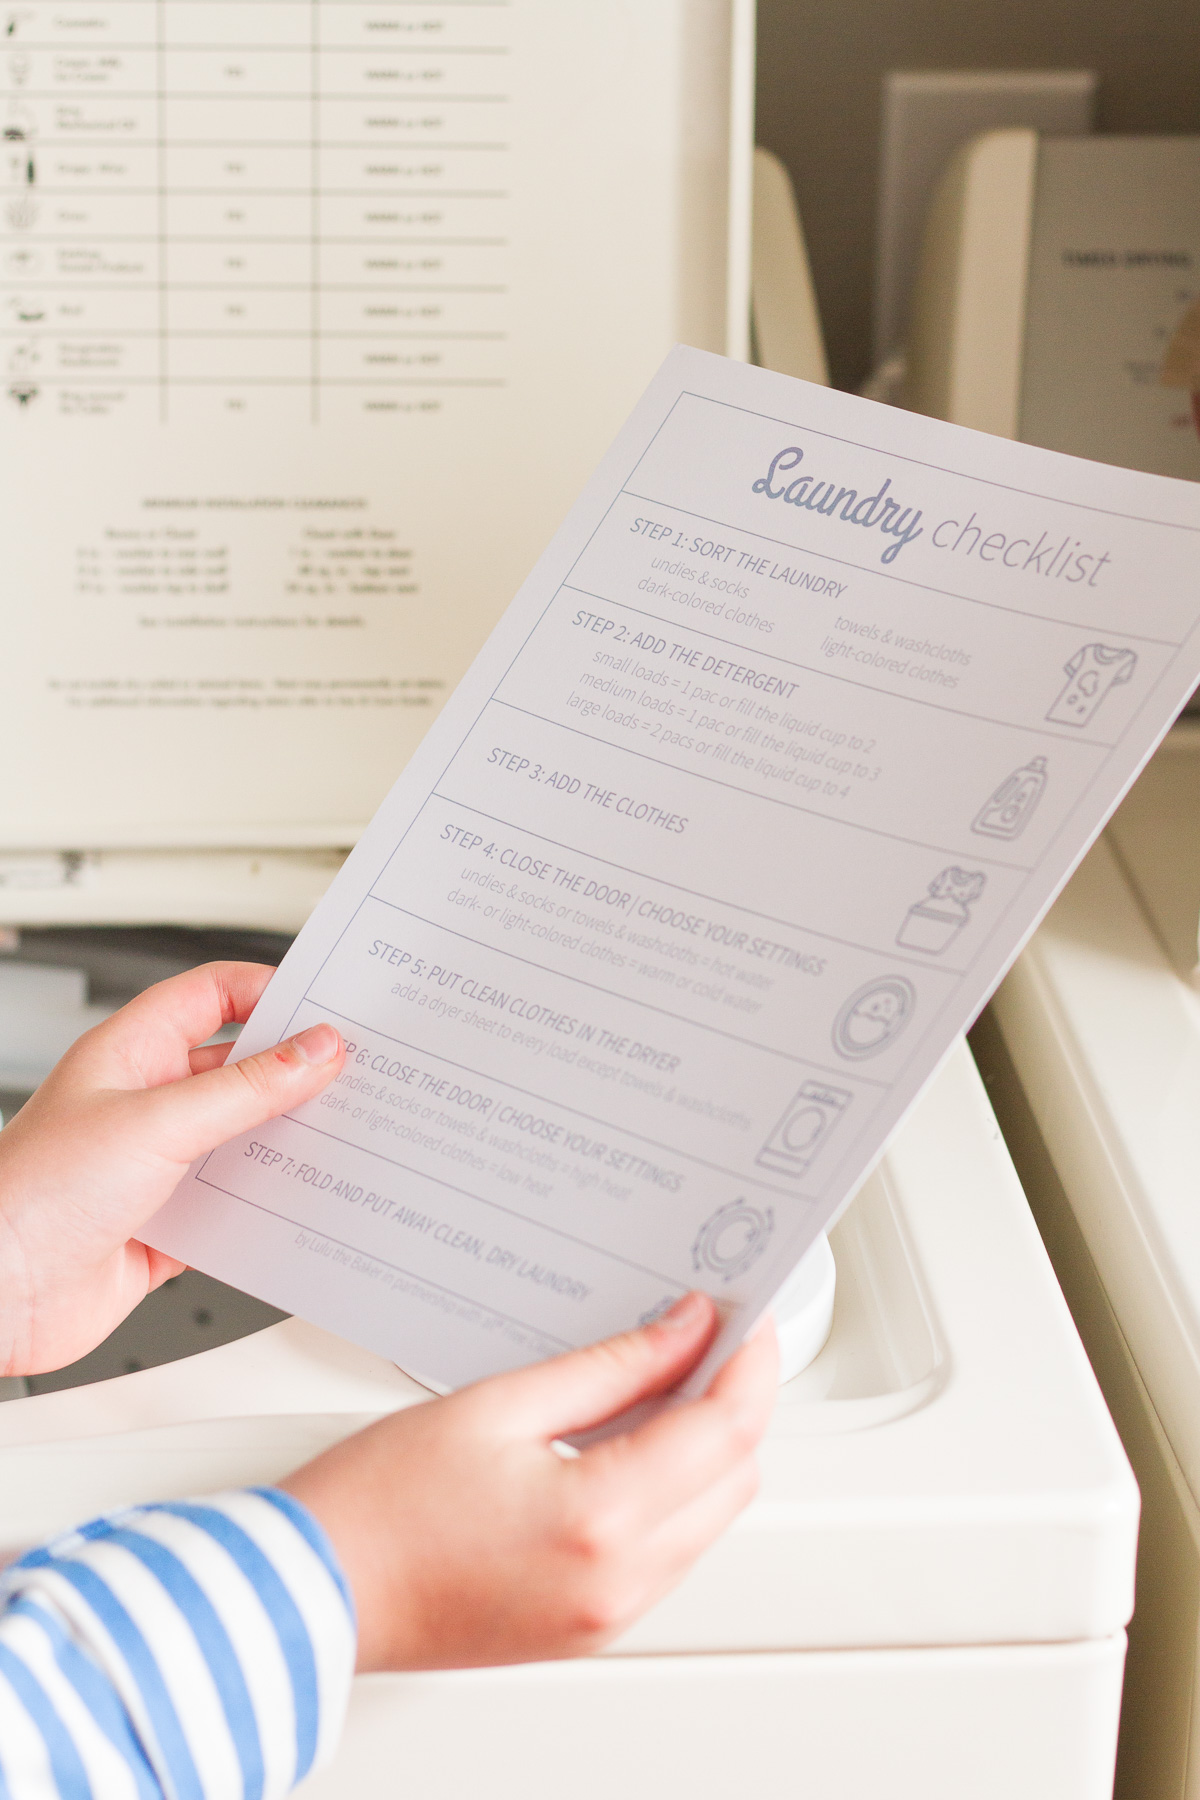 This free printable laundry checklist will help your kids learn how to help with the laundry.